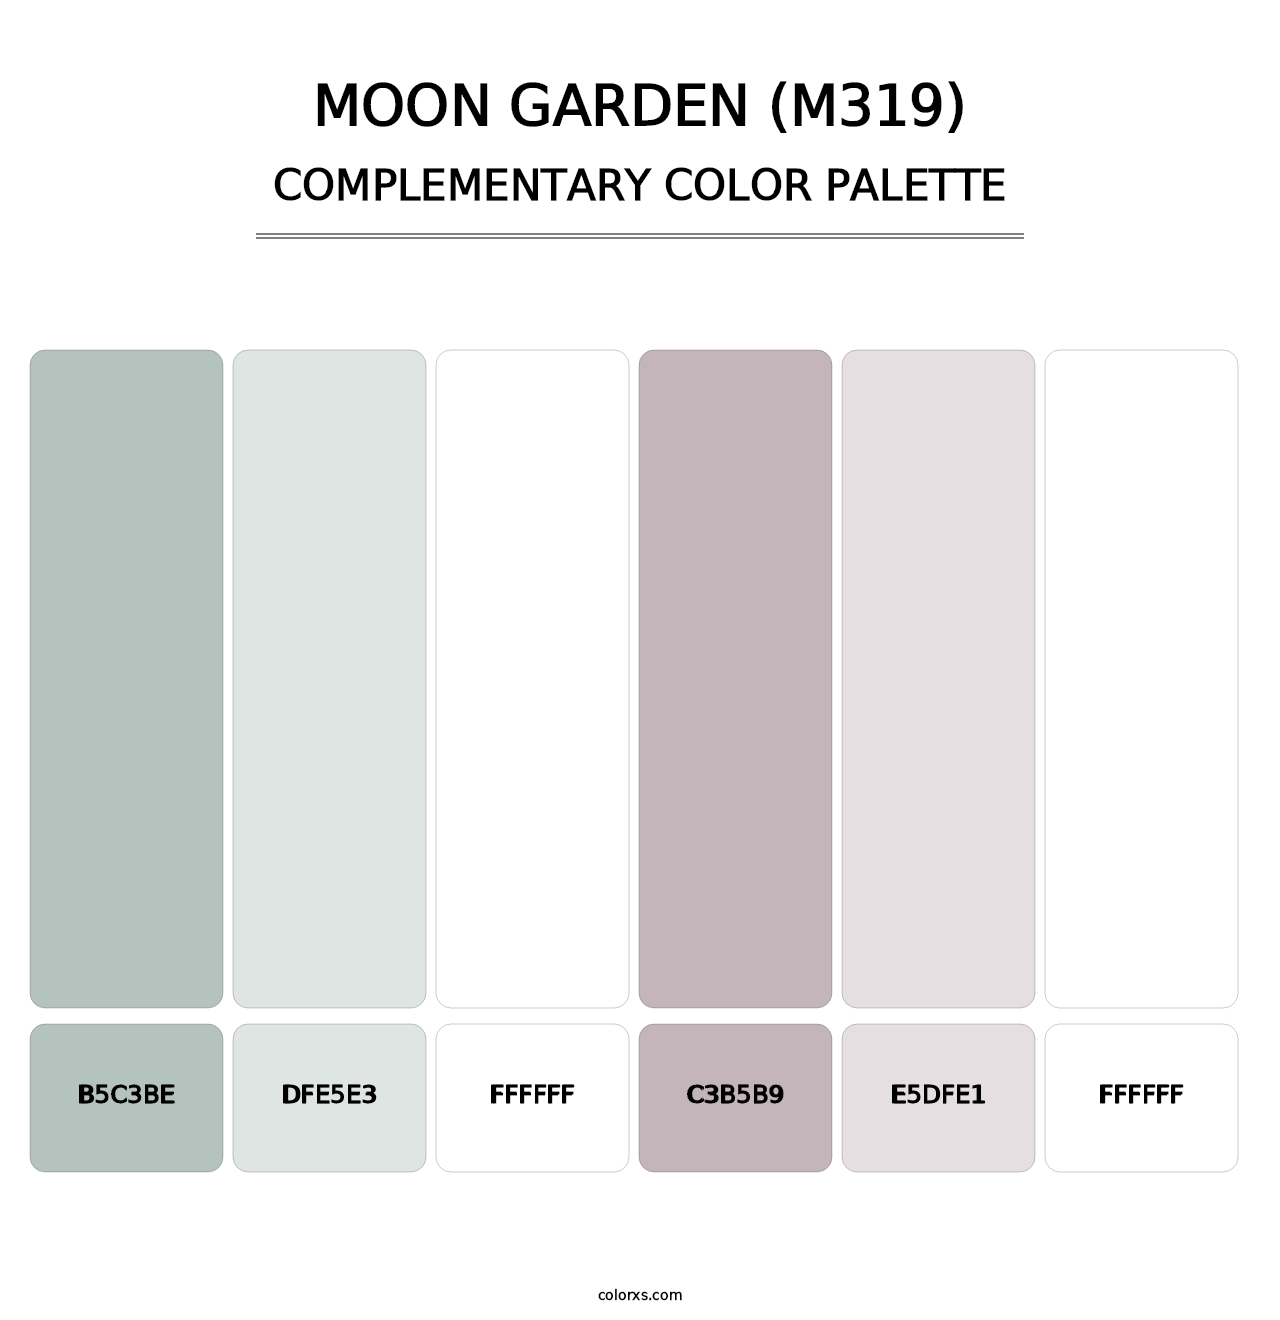 Moon Garden (M319) - Complementary Color Palette